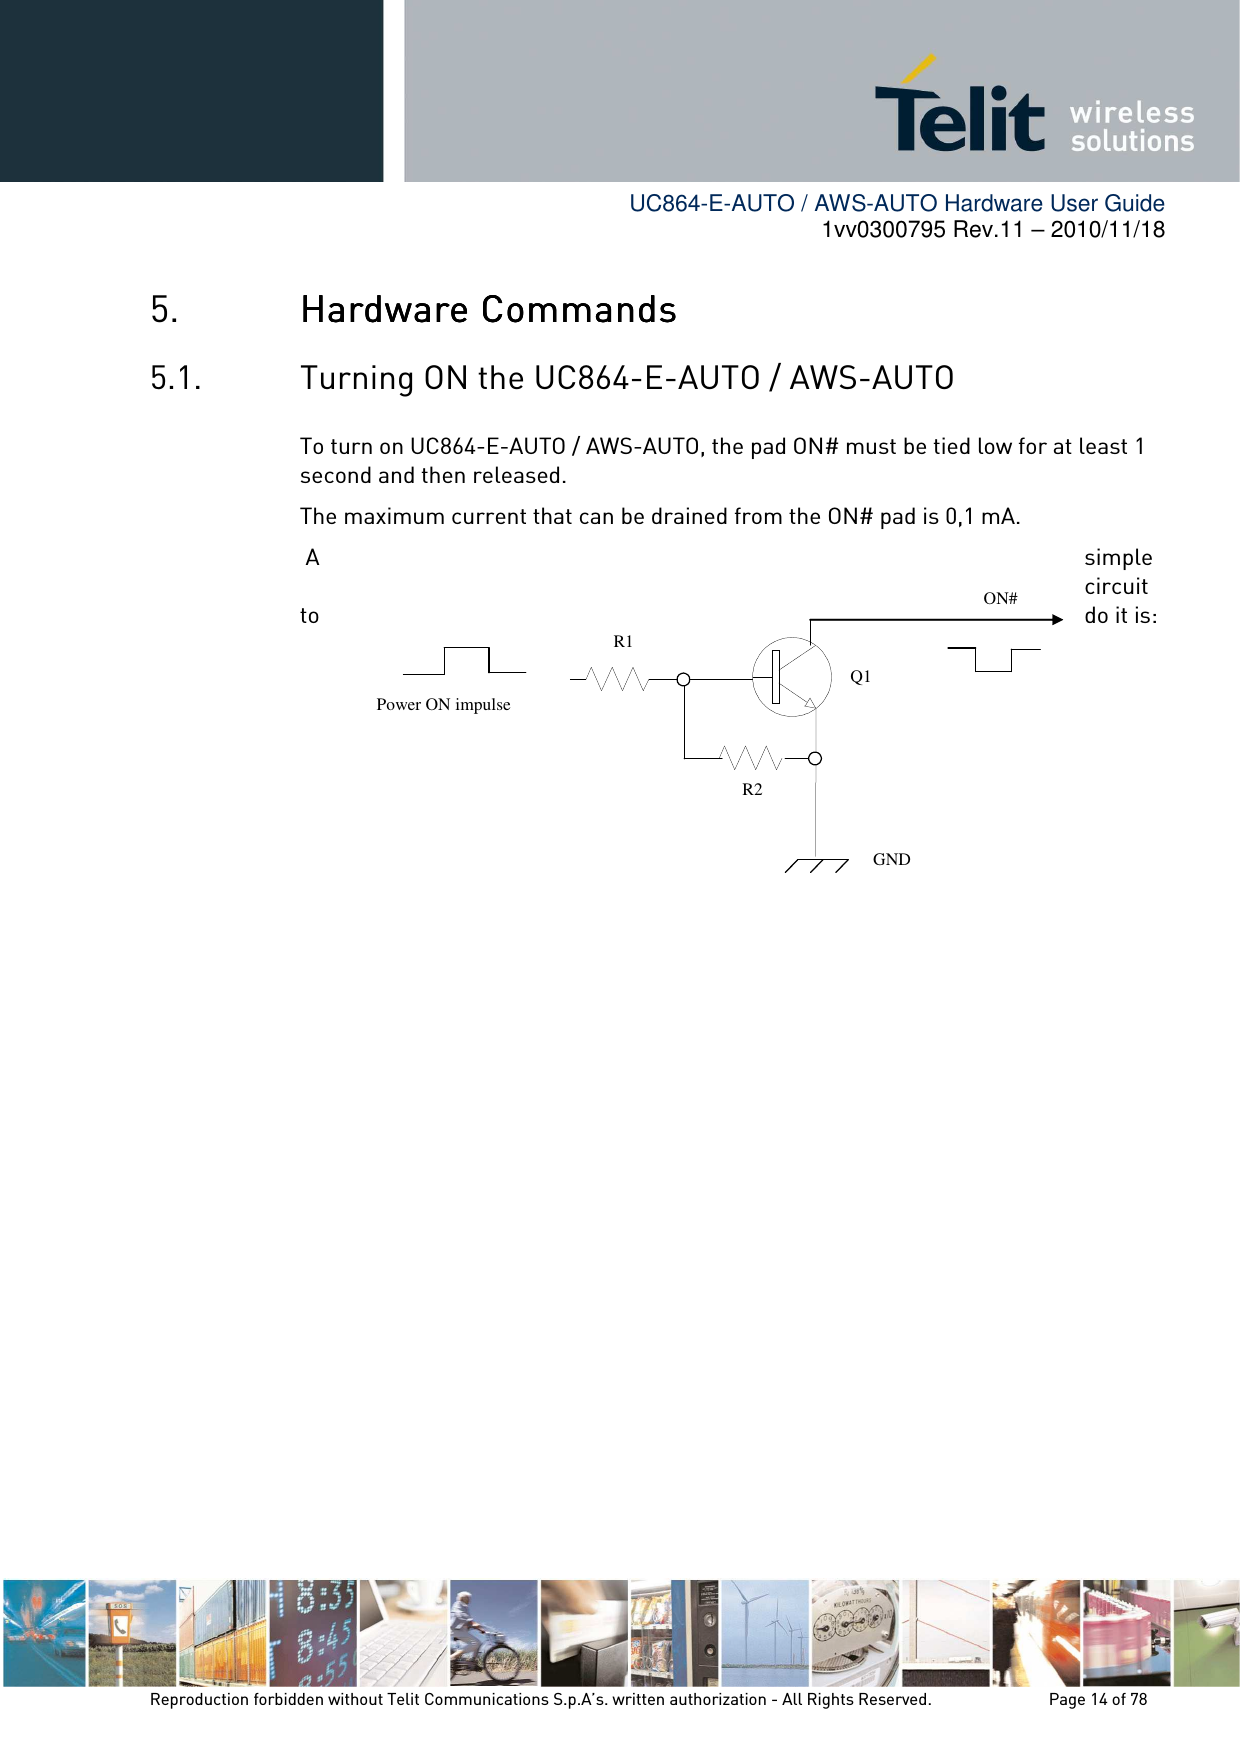        UC864-E-AUTO / AWS-AUTO Hardware User Guide 1vv0300795 Rev.11 – 2010/11/18     Reproduction forbidden without Telit Communications S.p.A’s. written authorization - All Rights Reserved.    Page 14 of 78  5. Hardware CommandsHardware CommandsHardware CommandsHardware Commands    5.1. Turning ON the UC864-E-AUTO / AWS-AUTO To turn on UC864-E-AUTO / AWS-AUTO, the pad ON# must be tied low for at least 1 second and then released. The maximum current that can be drained from the ON# pad is 0,1 mA.  A  simple circuit to  do it is:              ON# Power ON impulse   GND R1 R2 Q1 